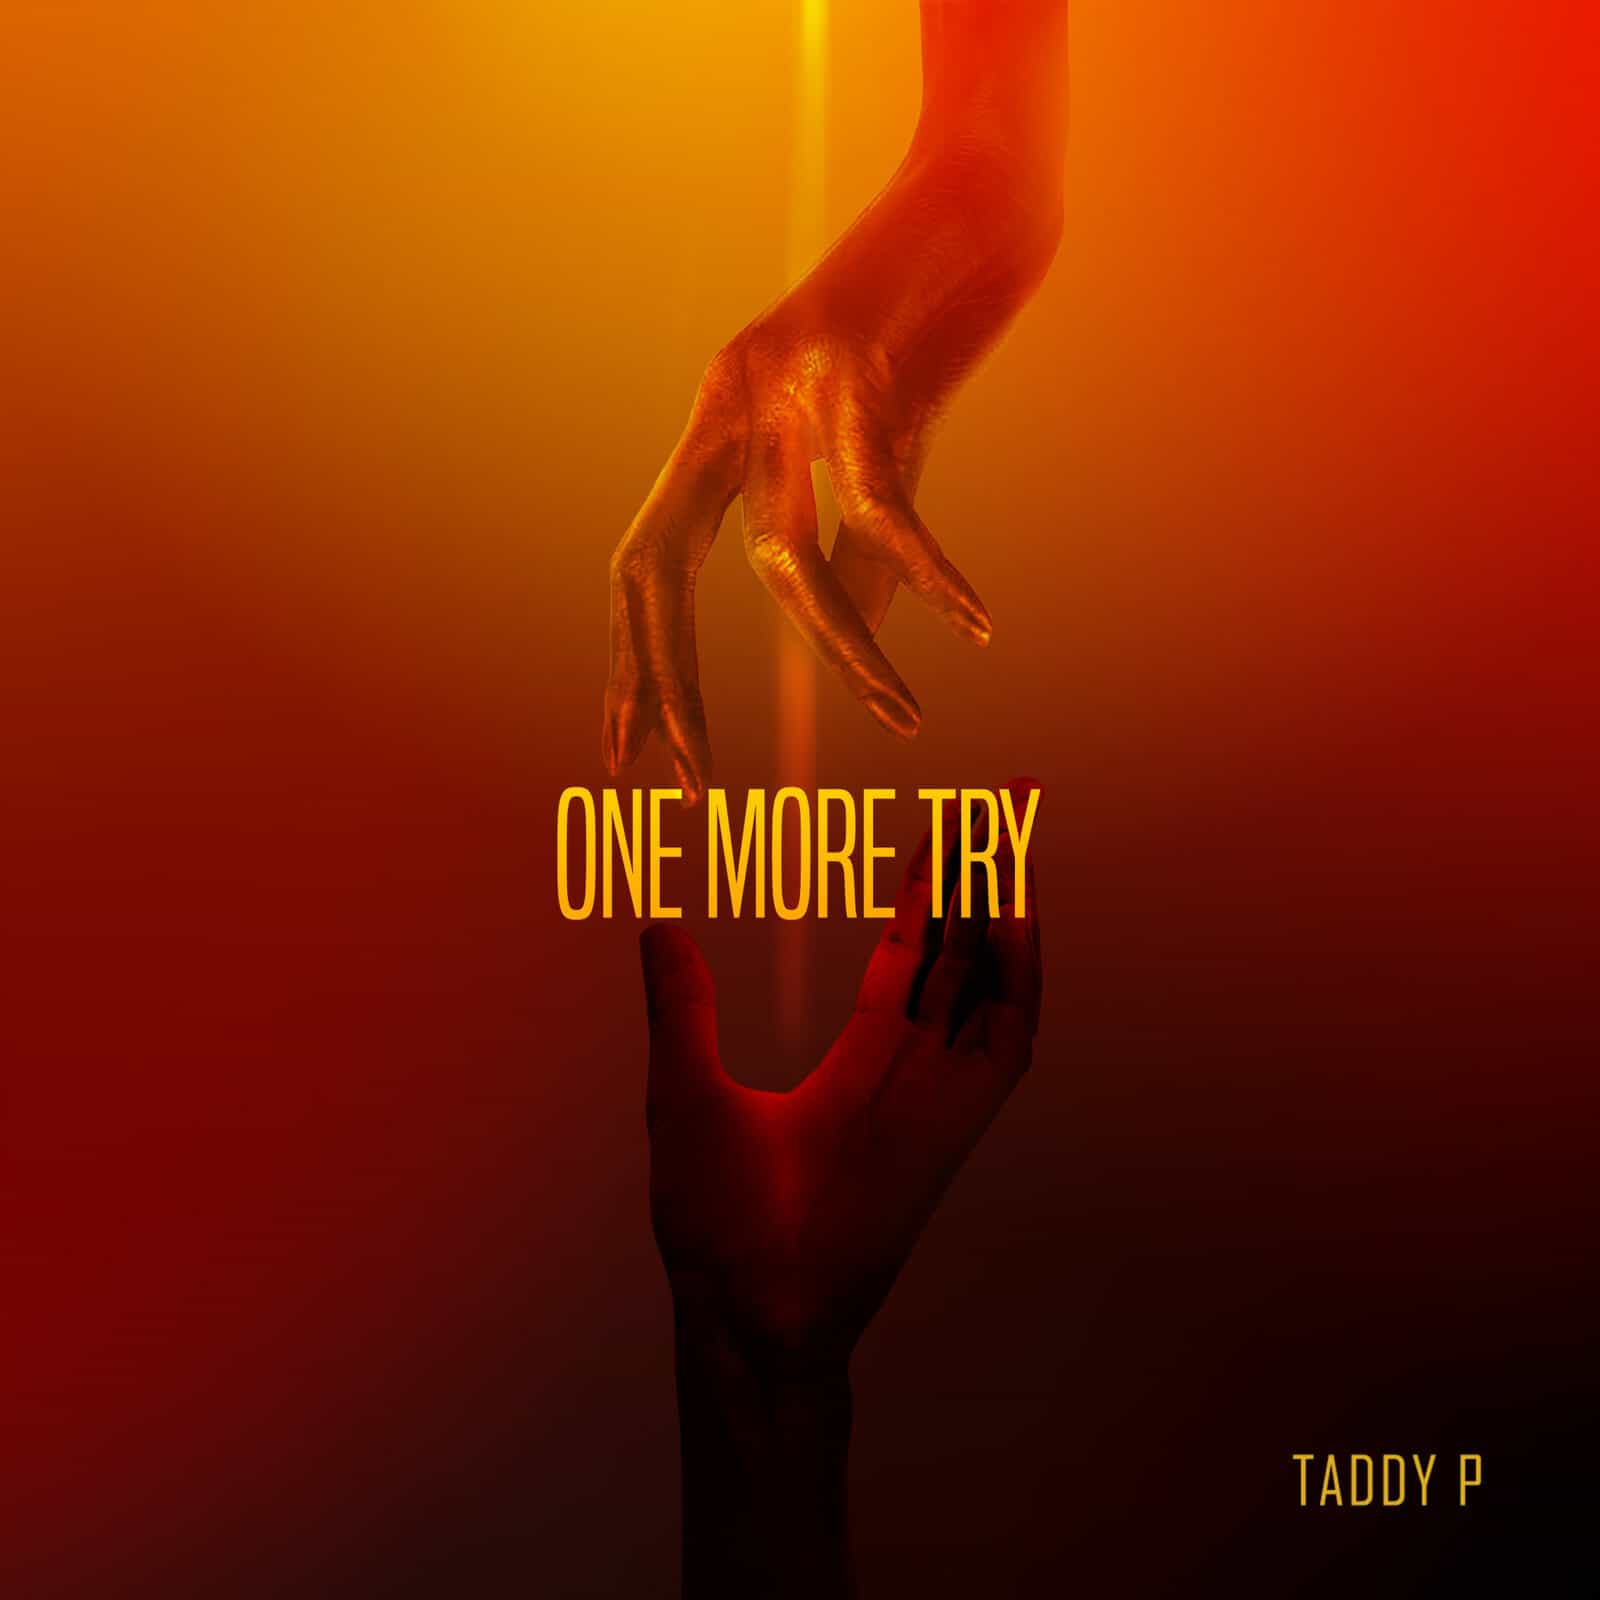 Taddy P - One More Try